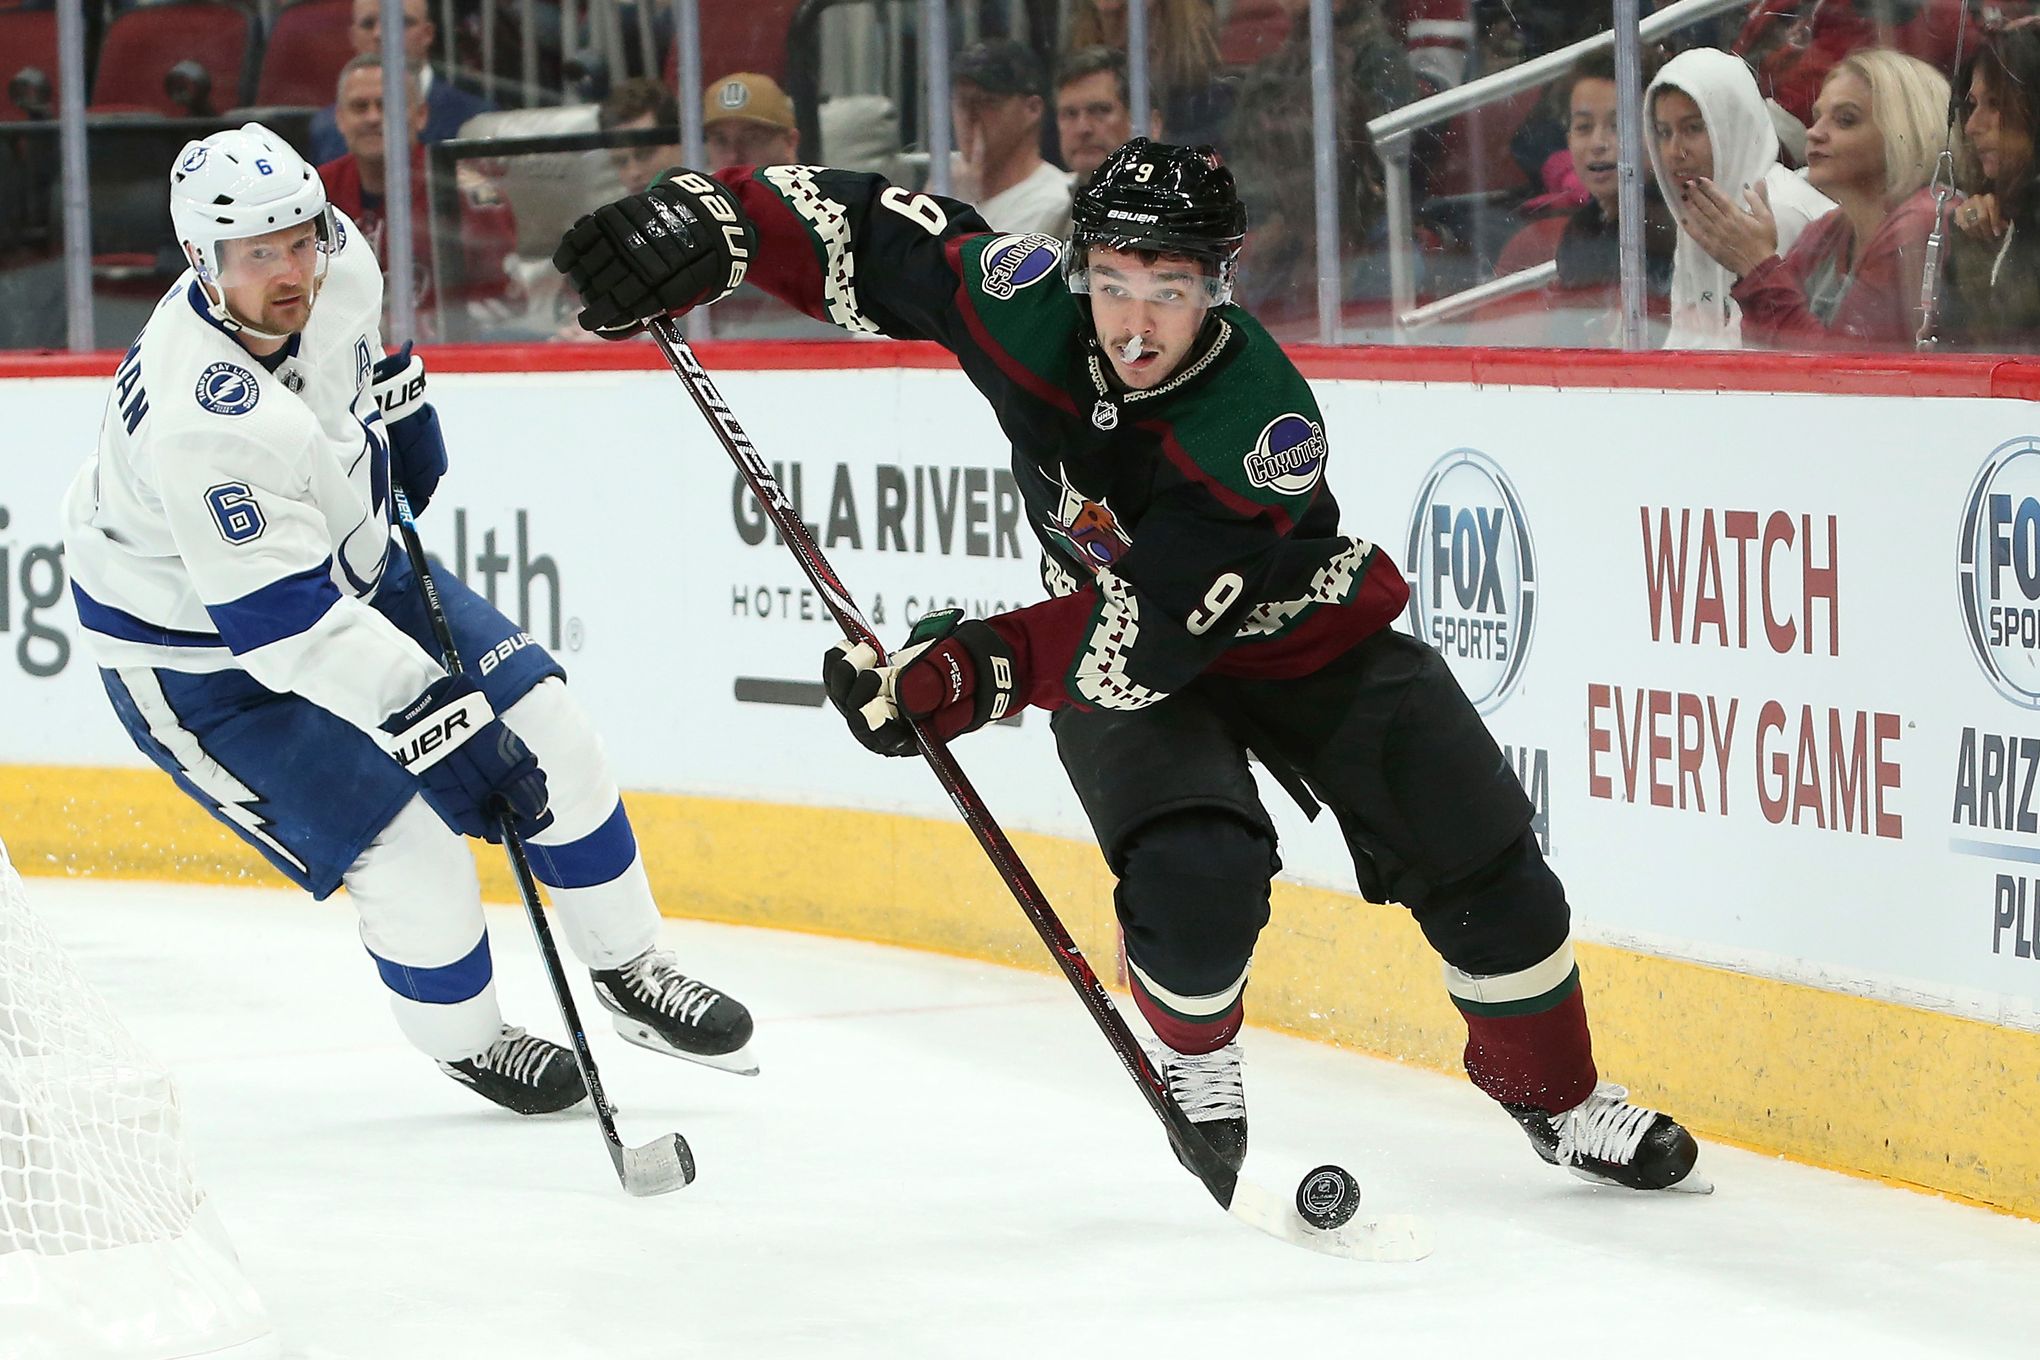 Clayton Keller, Coyotes agree to 8-year extension